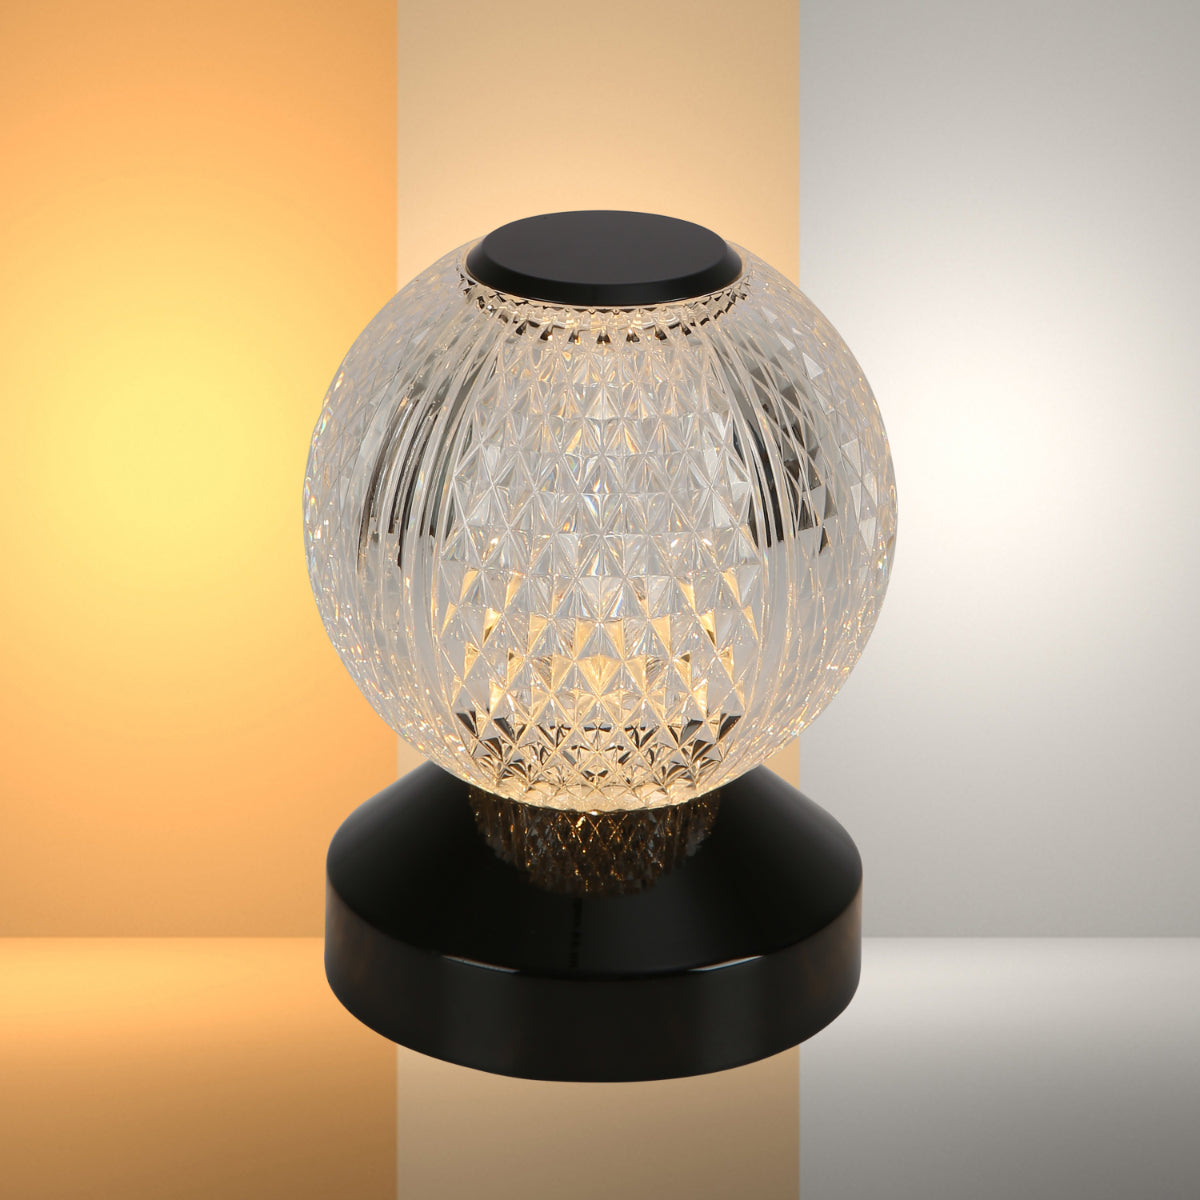 Main image of Illumina Sphere Touch: Rechargeable Spherical LED Lamp 130-03726